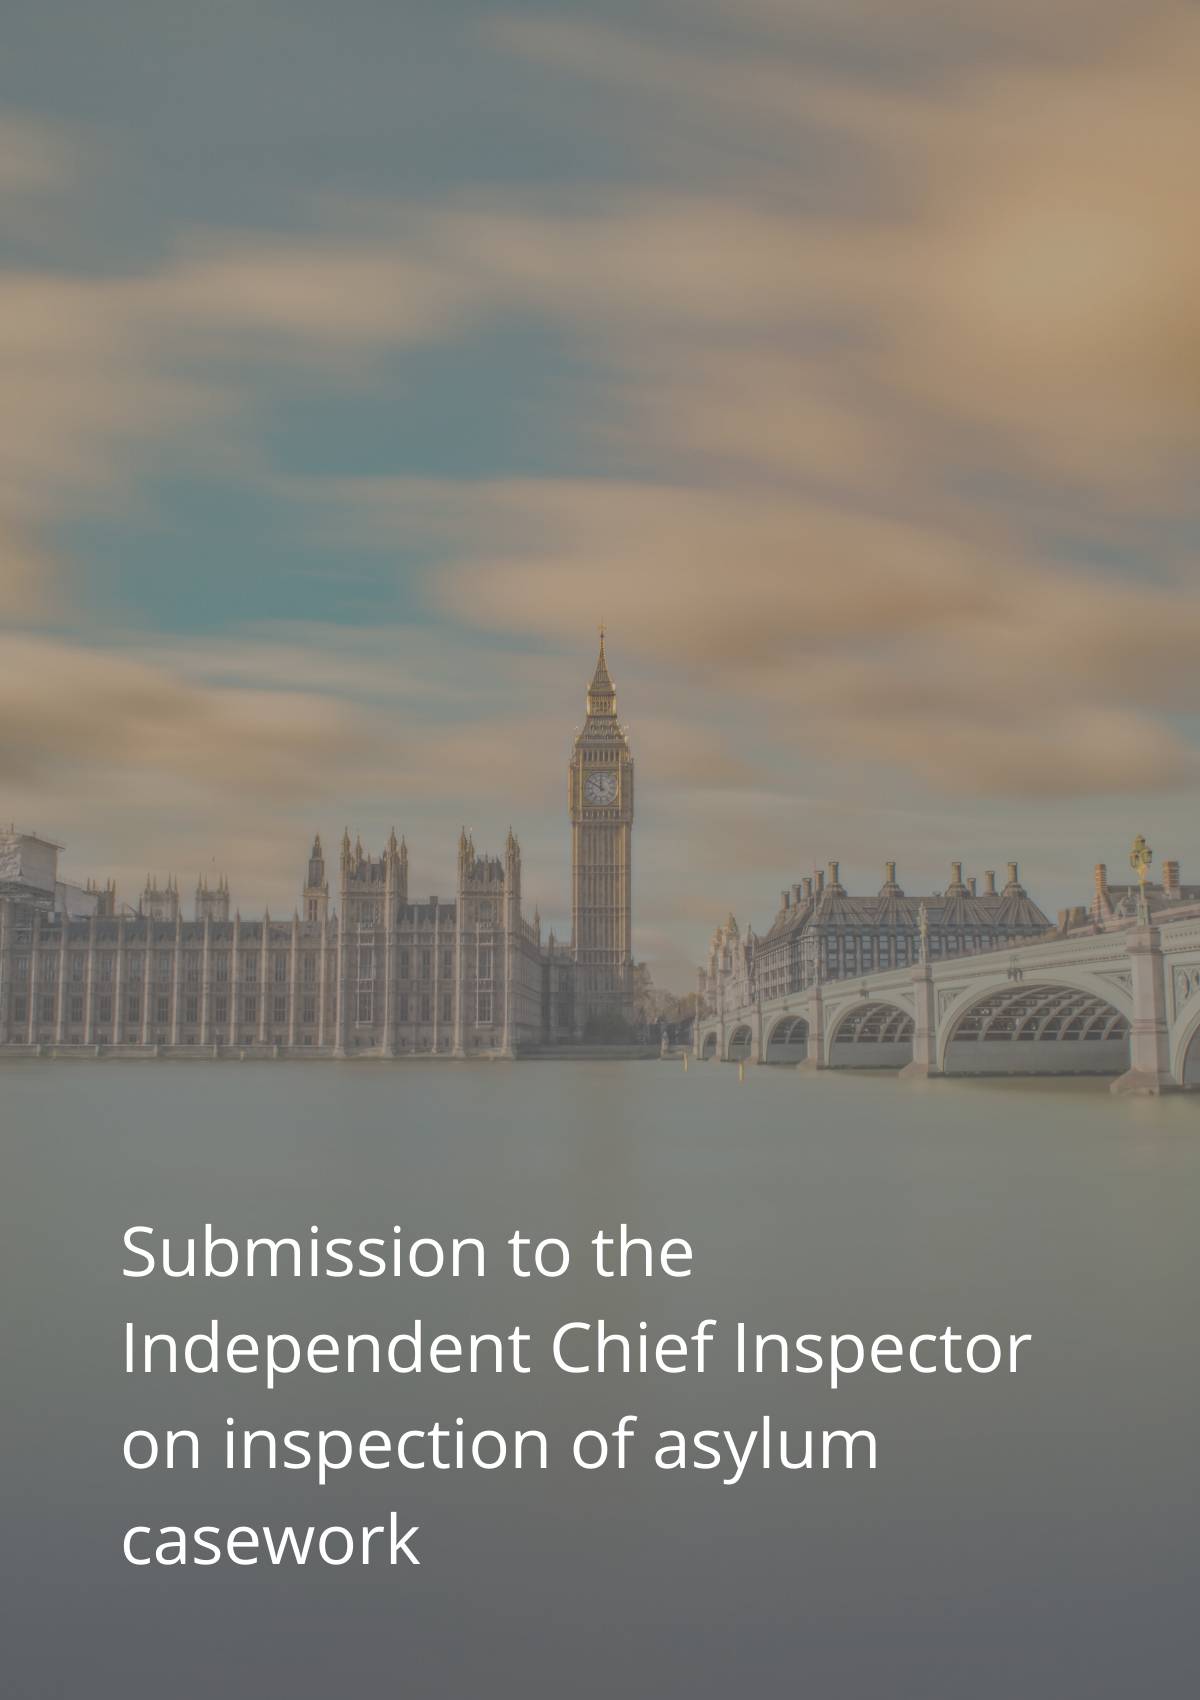 Submission to the independent chief inspector on inspection of asylum casework.